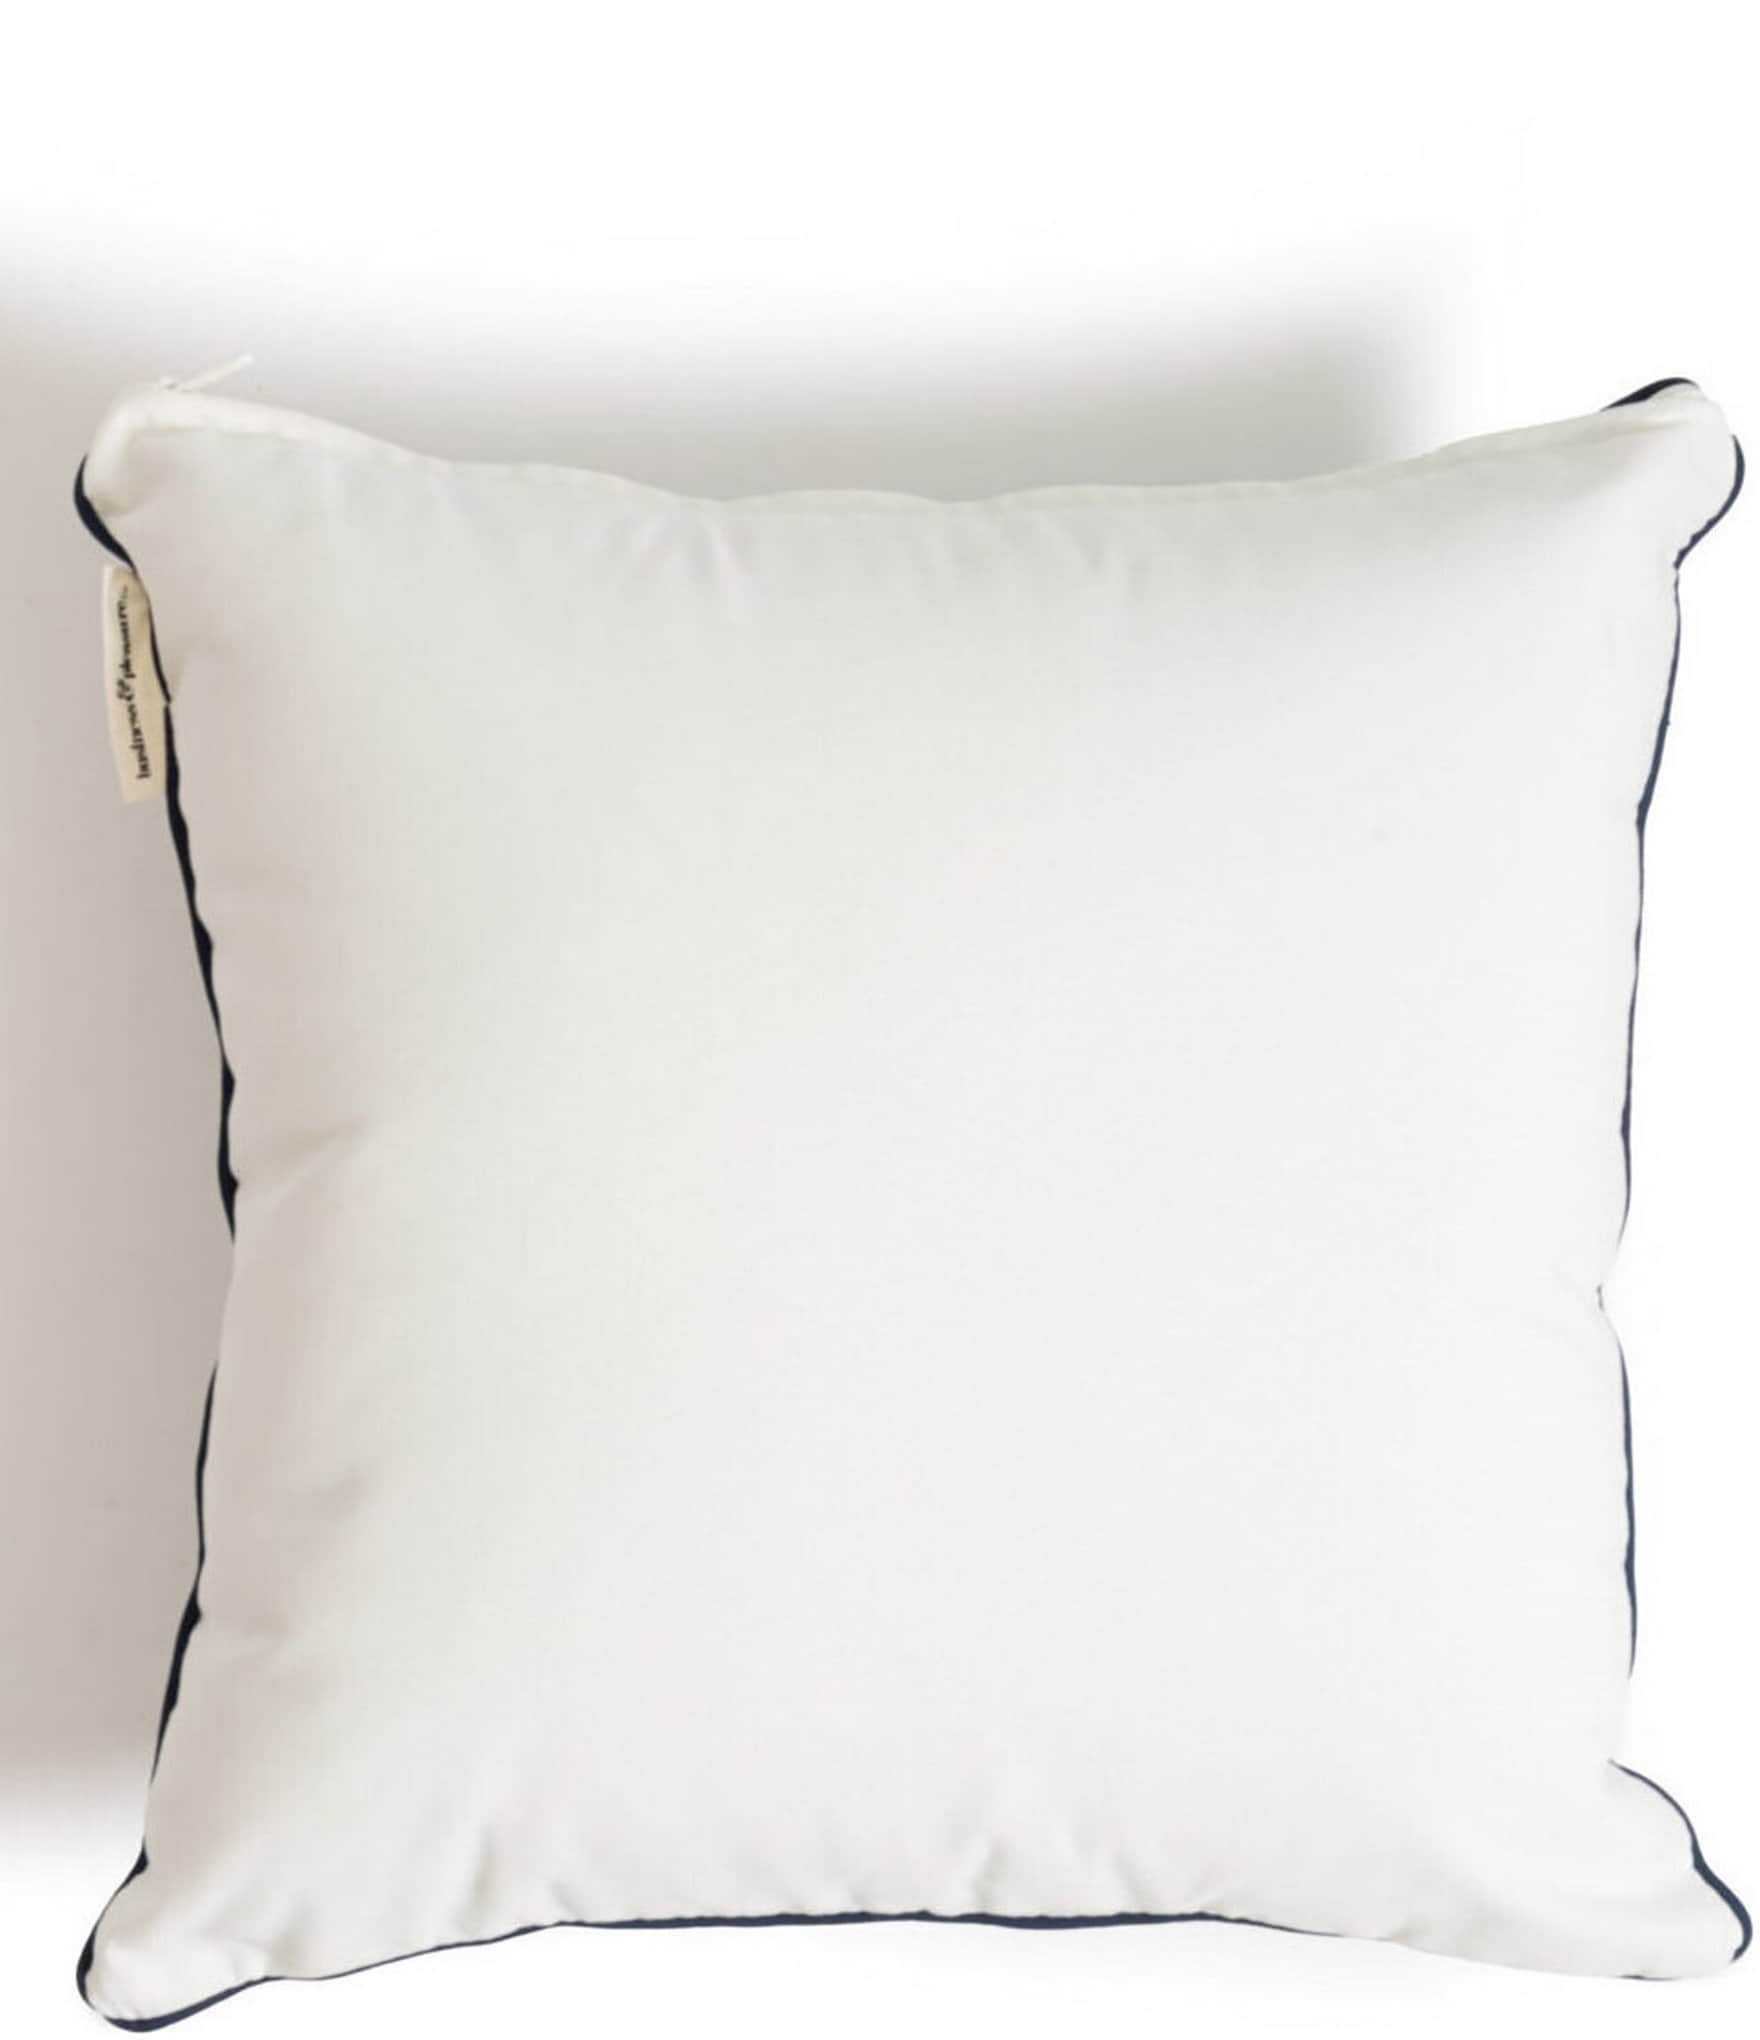 https://dimg.dillards.com/is/image/DillardsZoom/zoom/business--pleasure-the-solid-small-outdoor-living-collection-square-throw-pillow/00000000_zi_65bc29c9-018b-4501-bcaa-2dfc712ec7c8.jpg